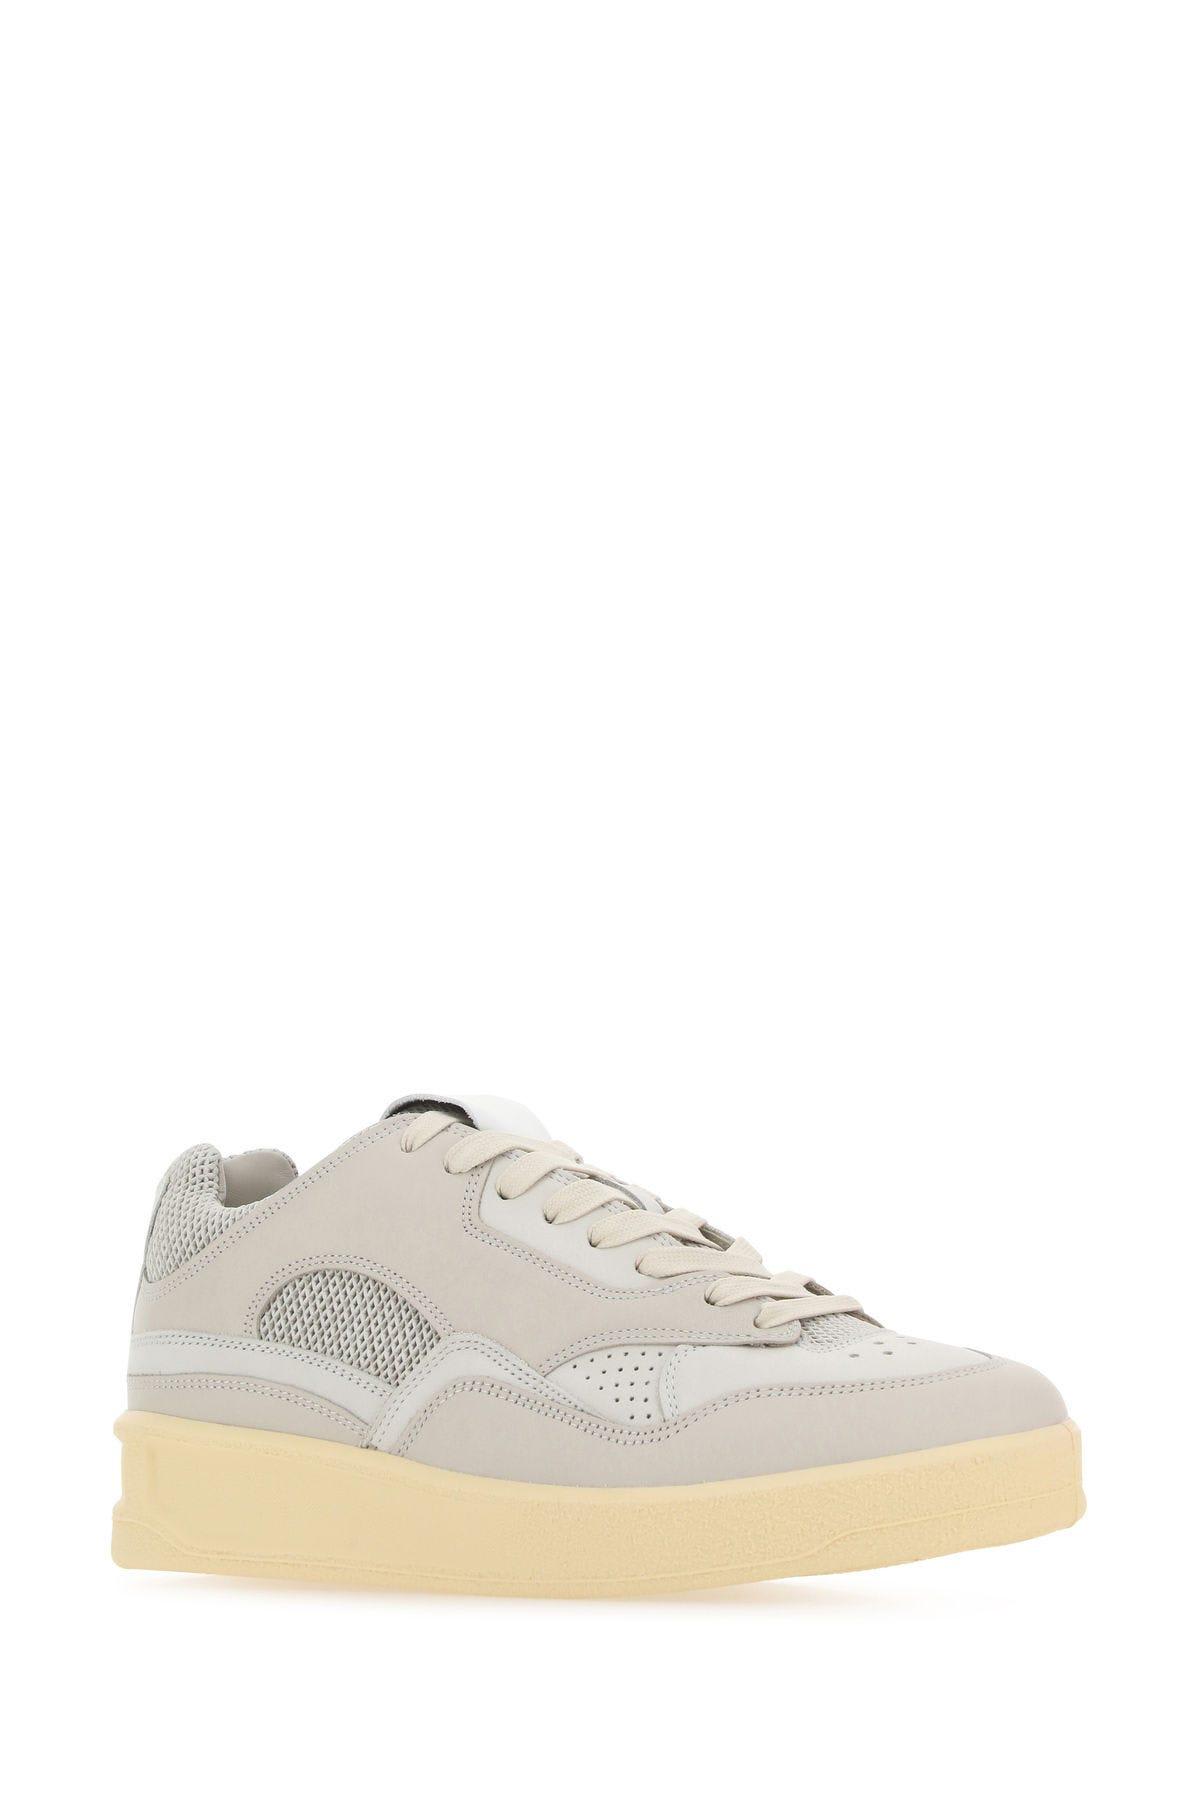 Shop Jil Sander Grey Canvas And Rubber Sneakers